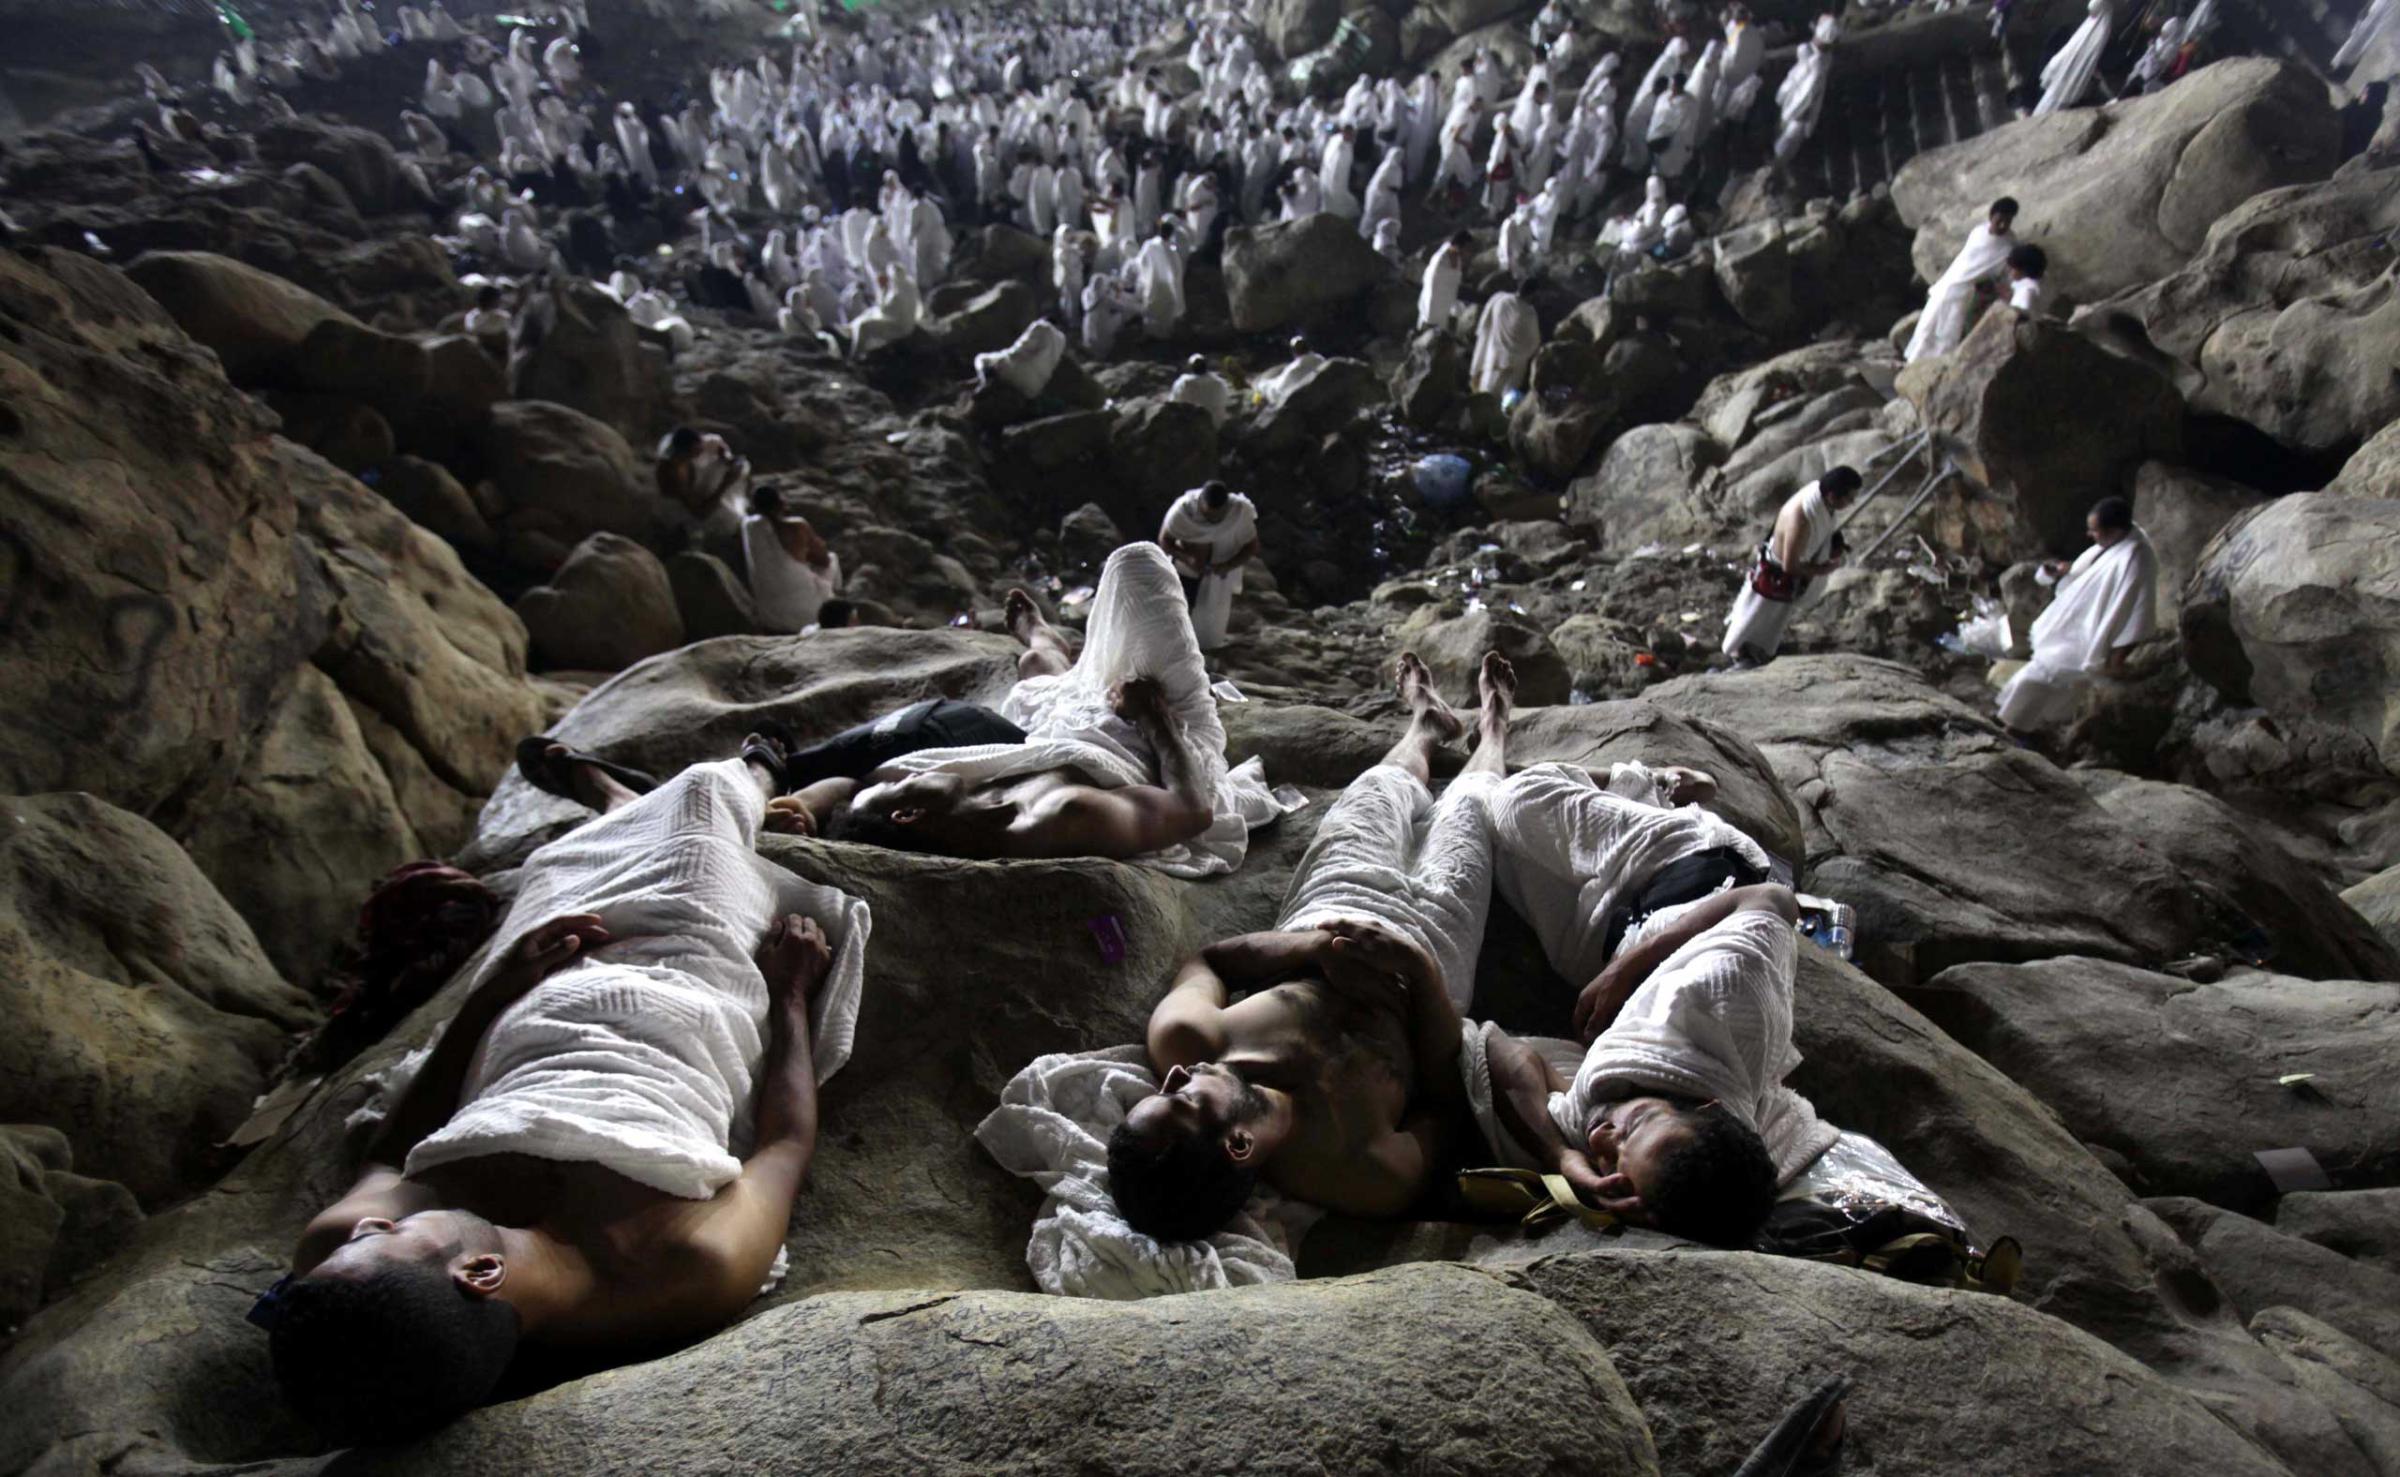 MUSLIM PILGRIMS GATHER ON MOUNT ARAFAT, NEAR MECCA, AS THEY TAKE PART IN ONE OF THE HAJJ RITUALS